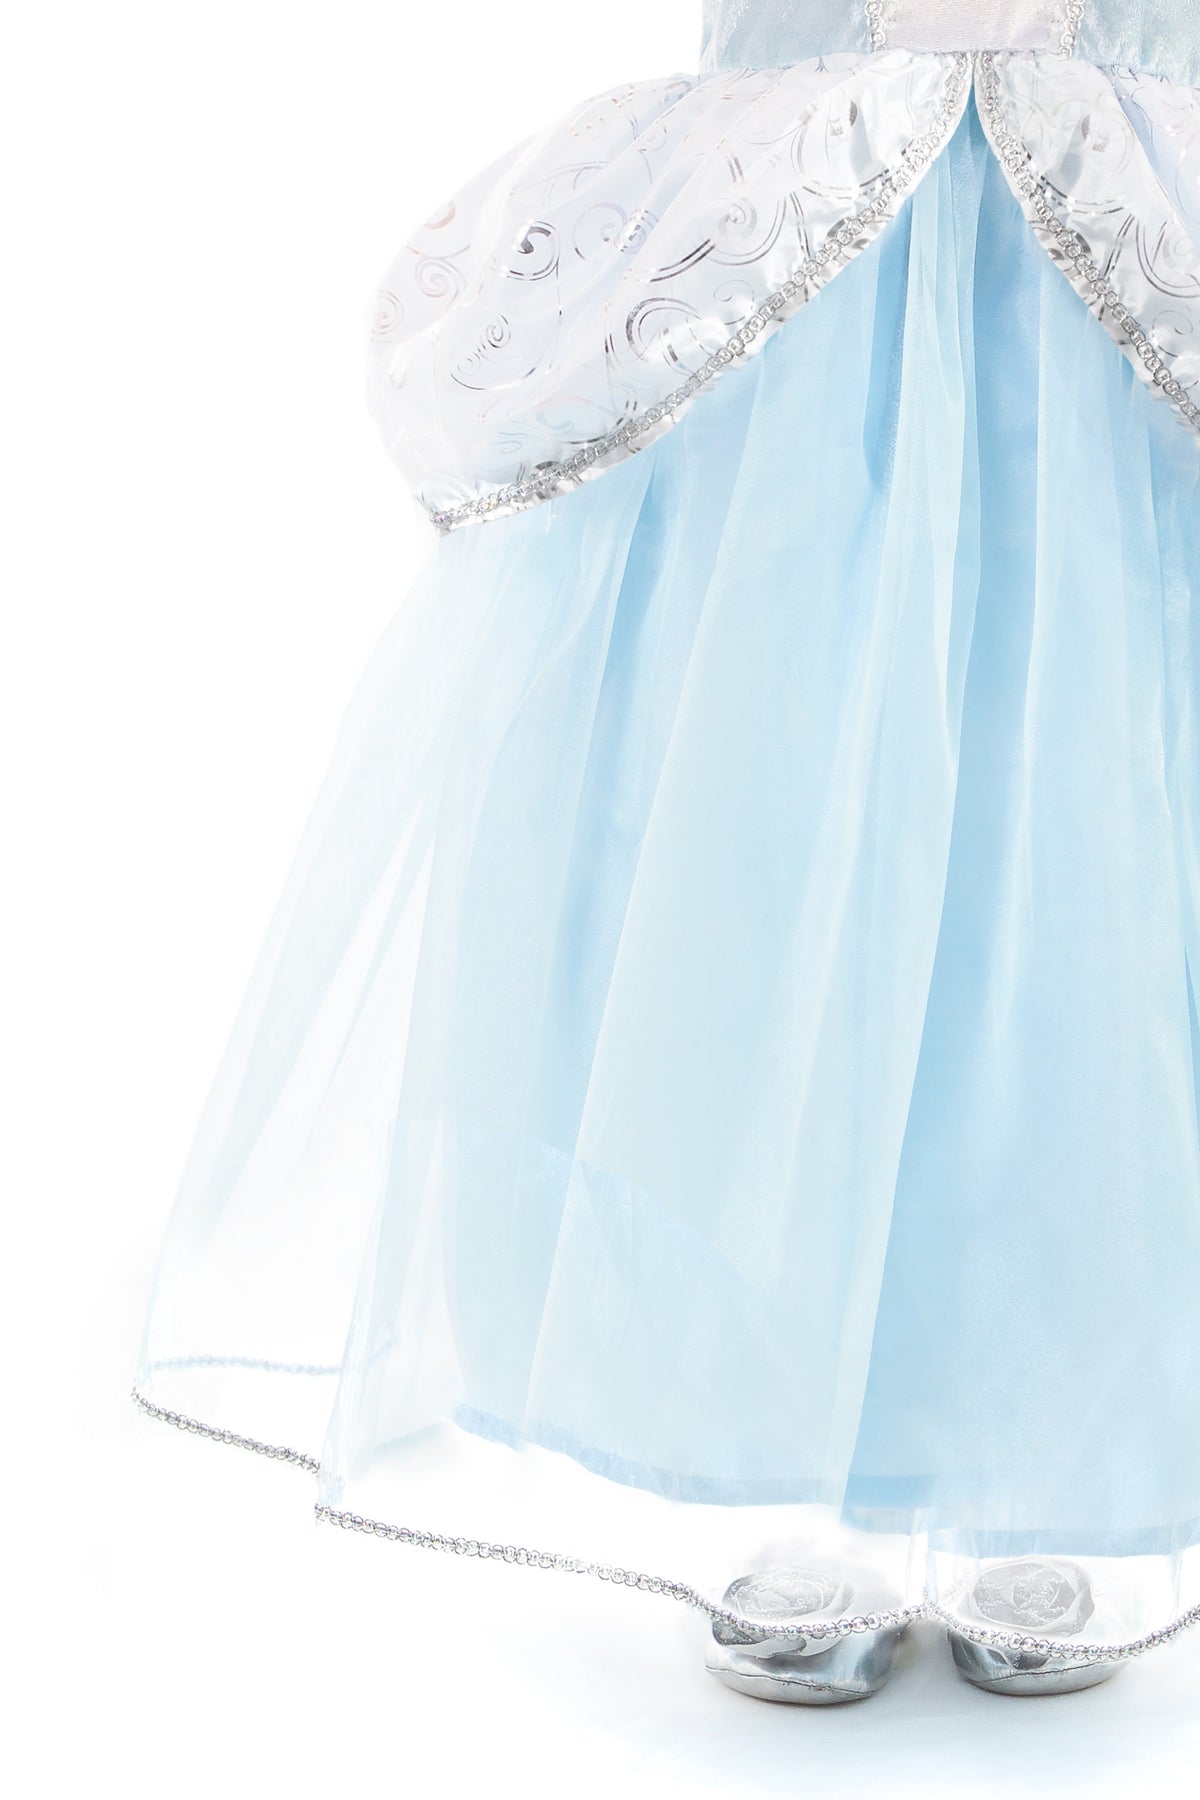 NWT Disney Store Cinderella Shoes Costume Dress Up Size 13/1